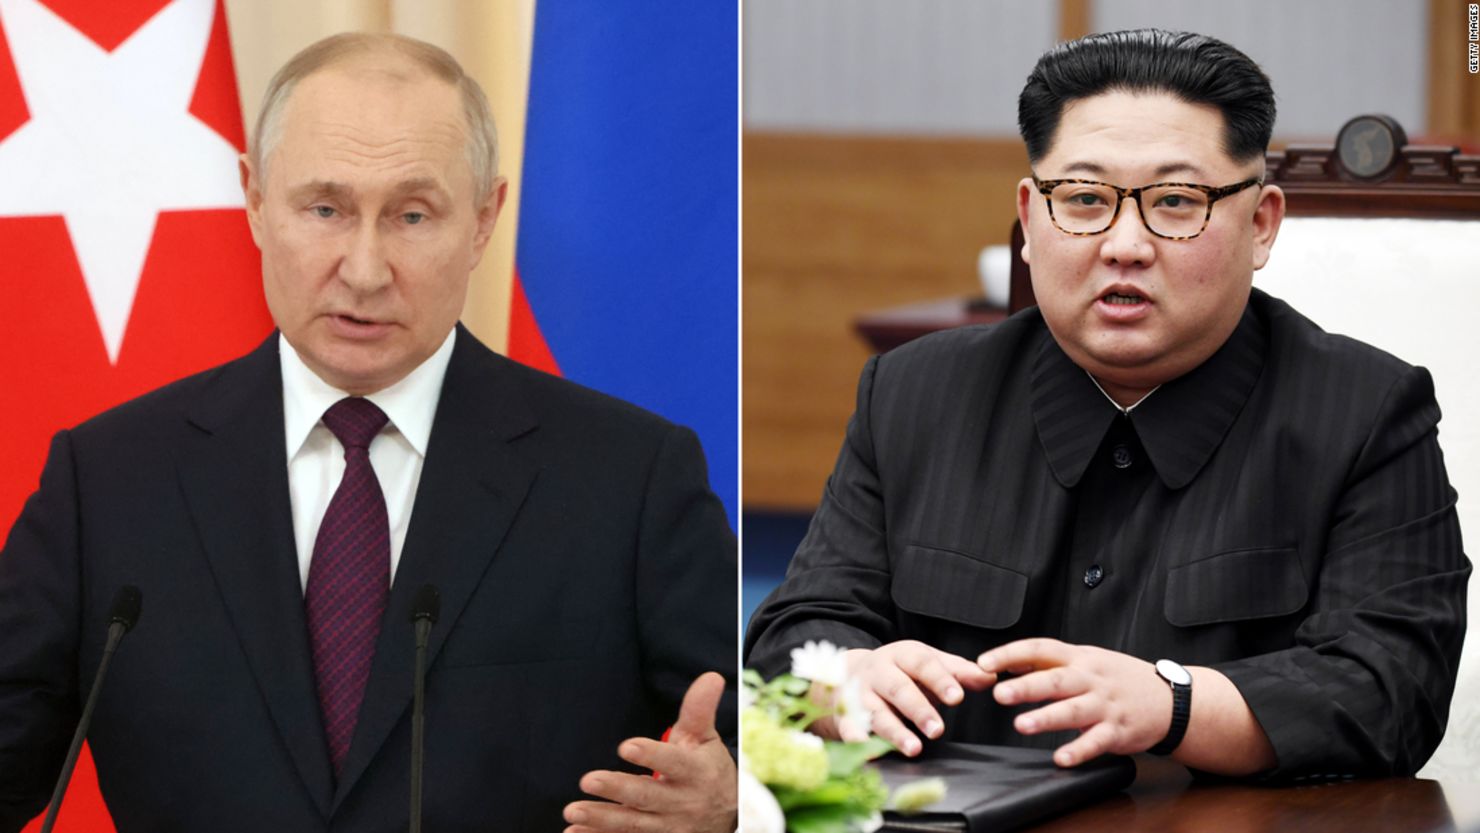 Left - Russian President Vladimir Putin gestures during his joint news conference with Turkish President Recep Tayyip Erdogan (not pictured), on September 4,2023, in Sochi, Russia. Right - North Korean leader Kim Jong Un speaks during the Inter-Korean Summit at the Peace House on April 27, 2018, in Panmunjom, South Korea.